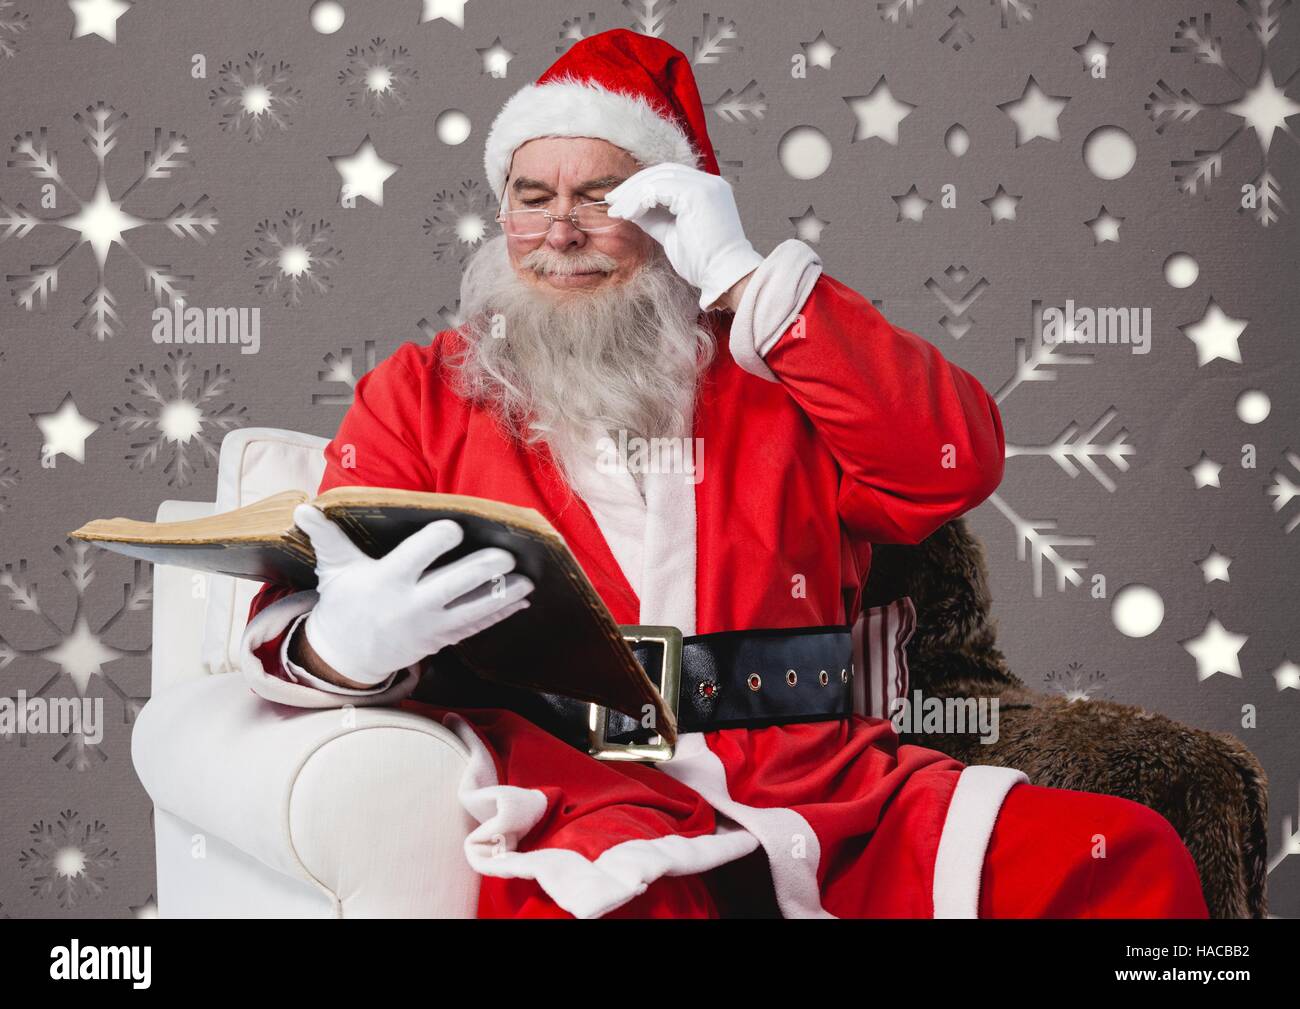 Santa claus reading a book while sitting on a chair Stock Photo